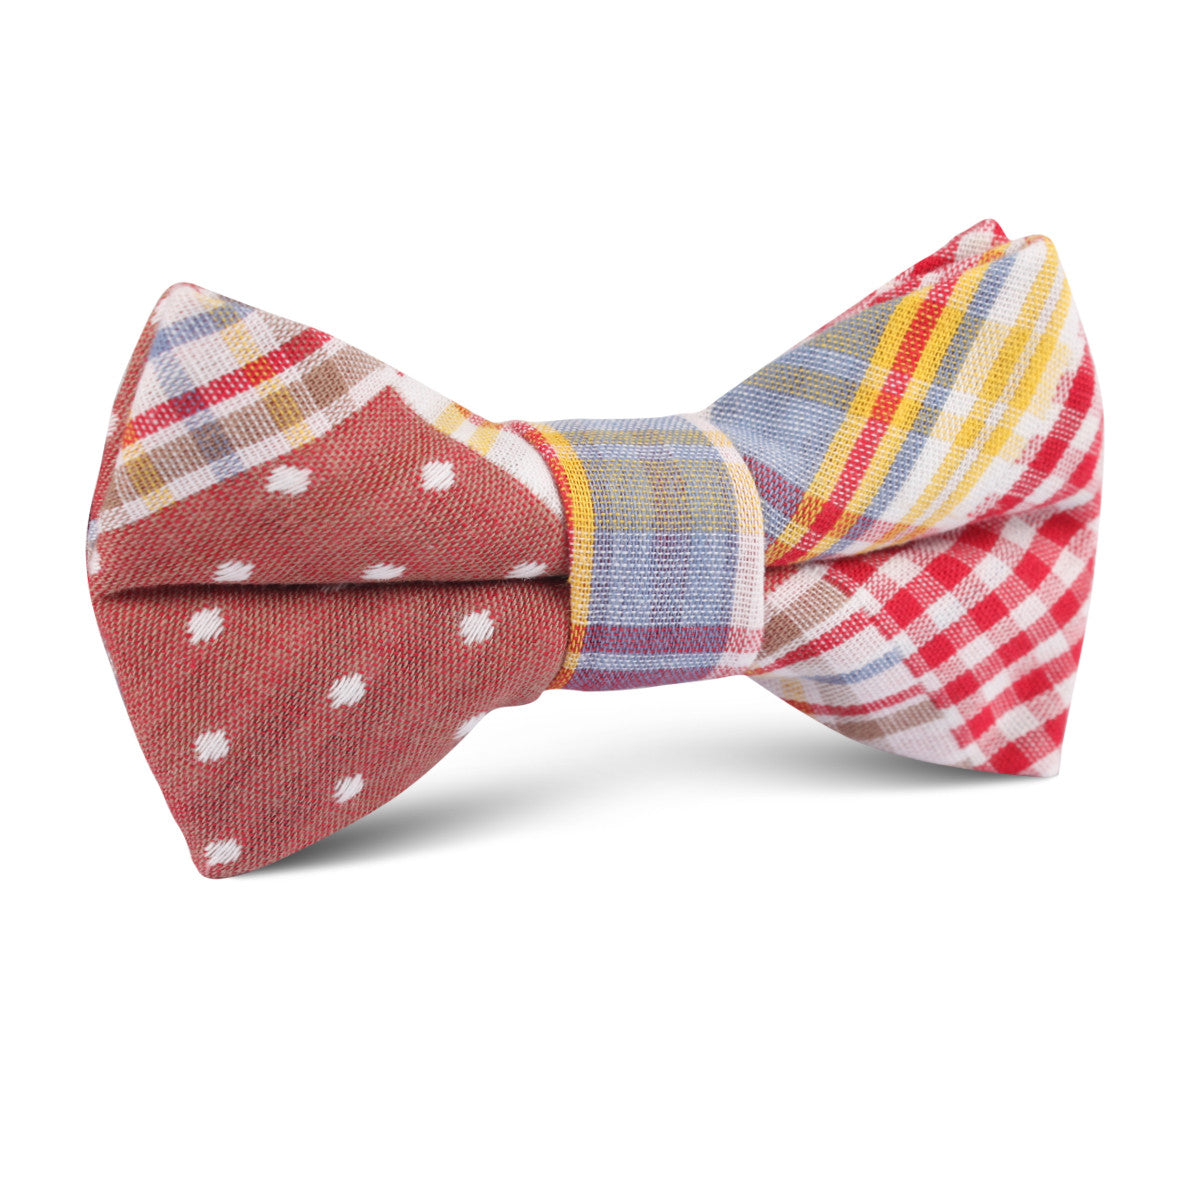 Palid Red Gingham Cotton Polka Dot Kids Bow Tie